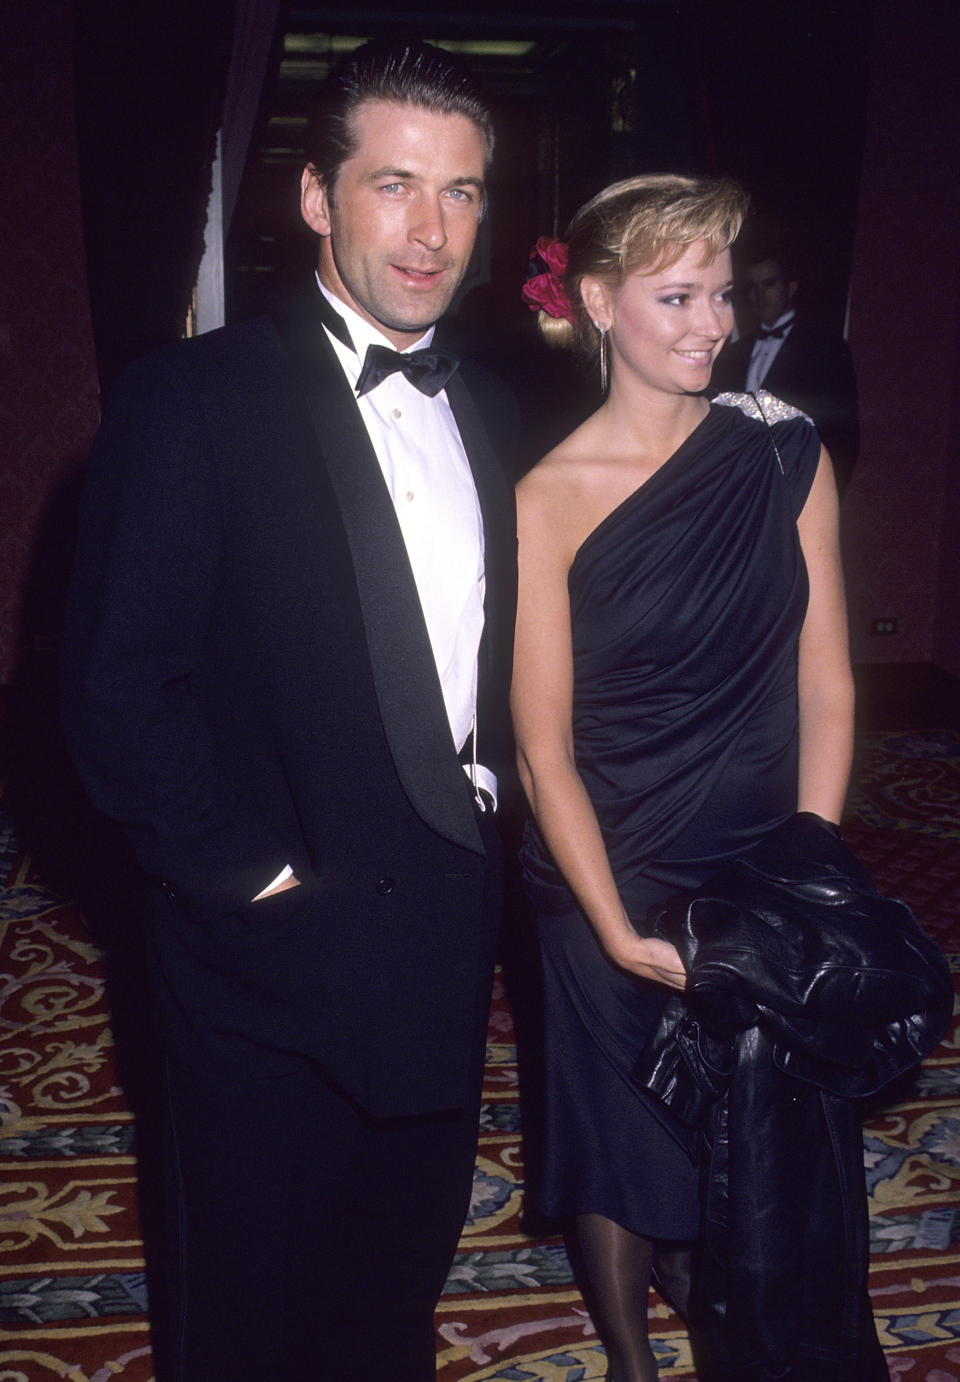 Baldwin and a date attend the Casting Society of America's Fifth Annual Artios Awards at the Century Cafe in New York.